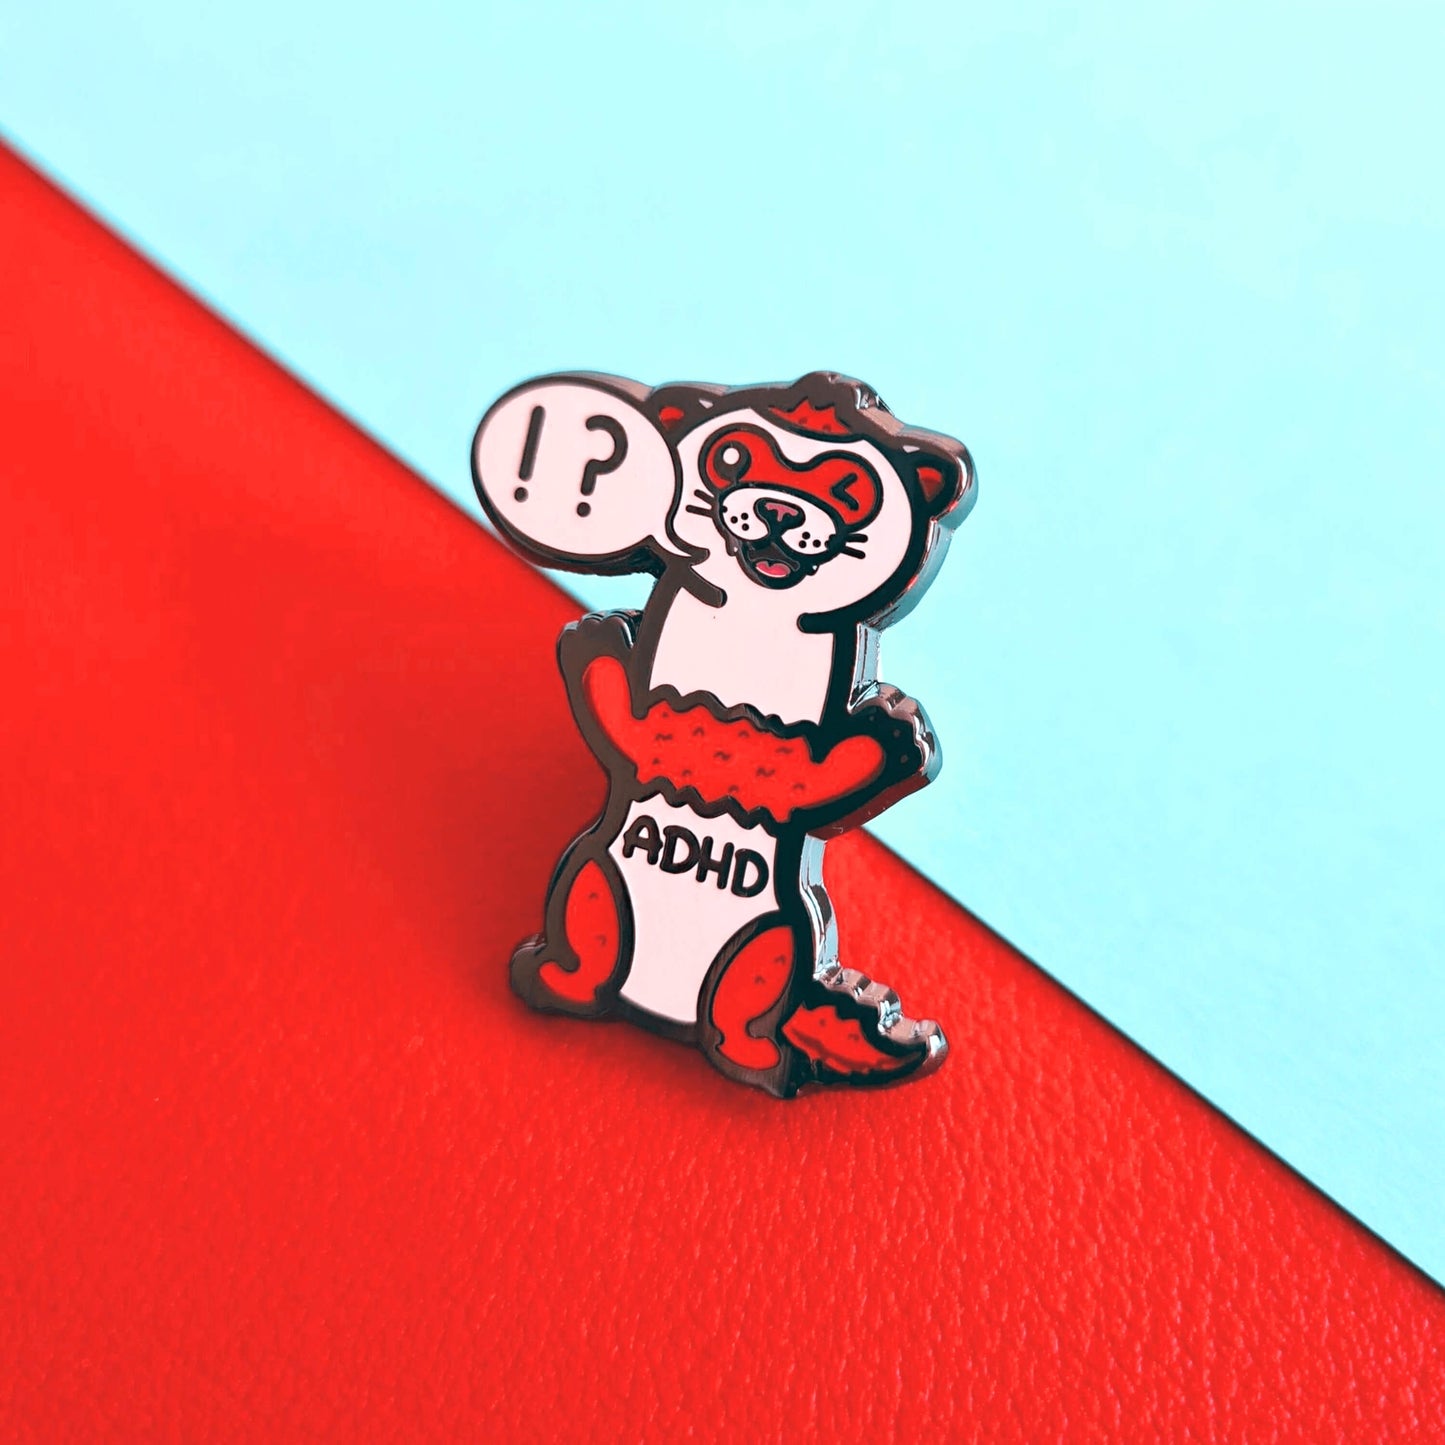 A red and white ferret enamel pin with it's mouth open in a smile and it's little teeth are showing. One of it's eyes are closed shut and it is standing on it's back legs. There is a speech-bubble from the ferret's mouth with '!?' inside it. The enamel pin is shown on a red and blue background. Raising awareness for ADHD - Attention deficit hyperactivity disorder.